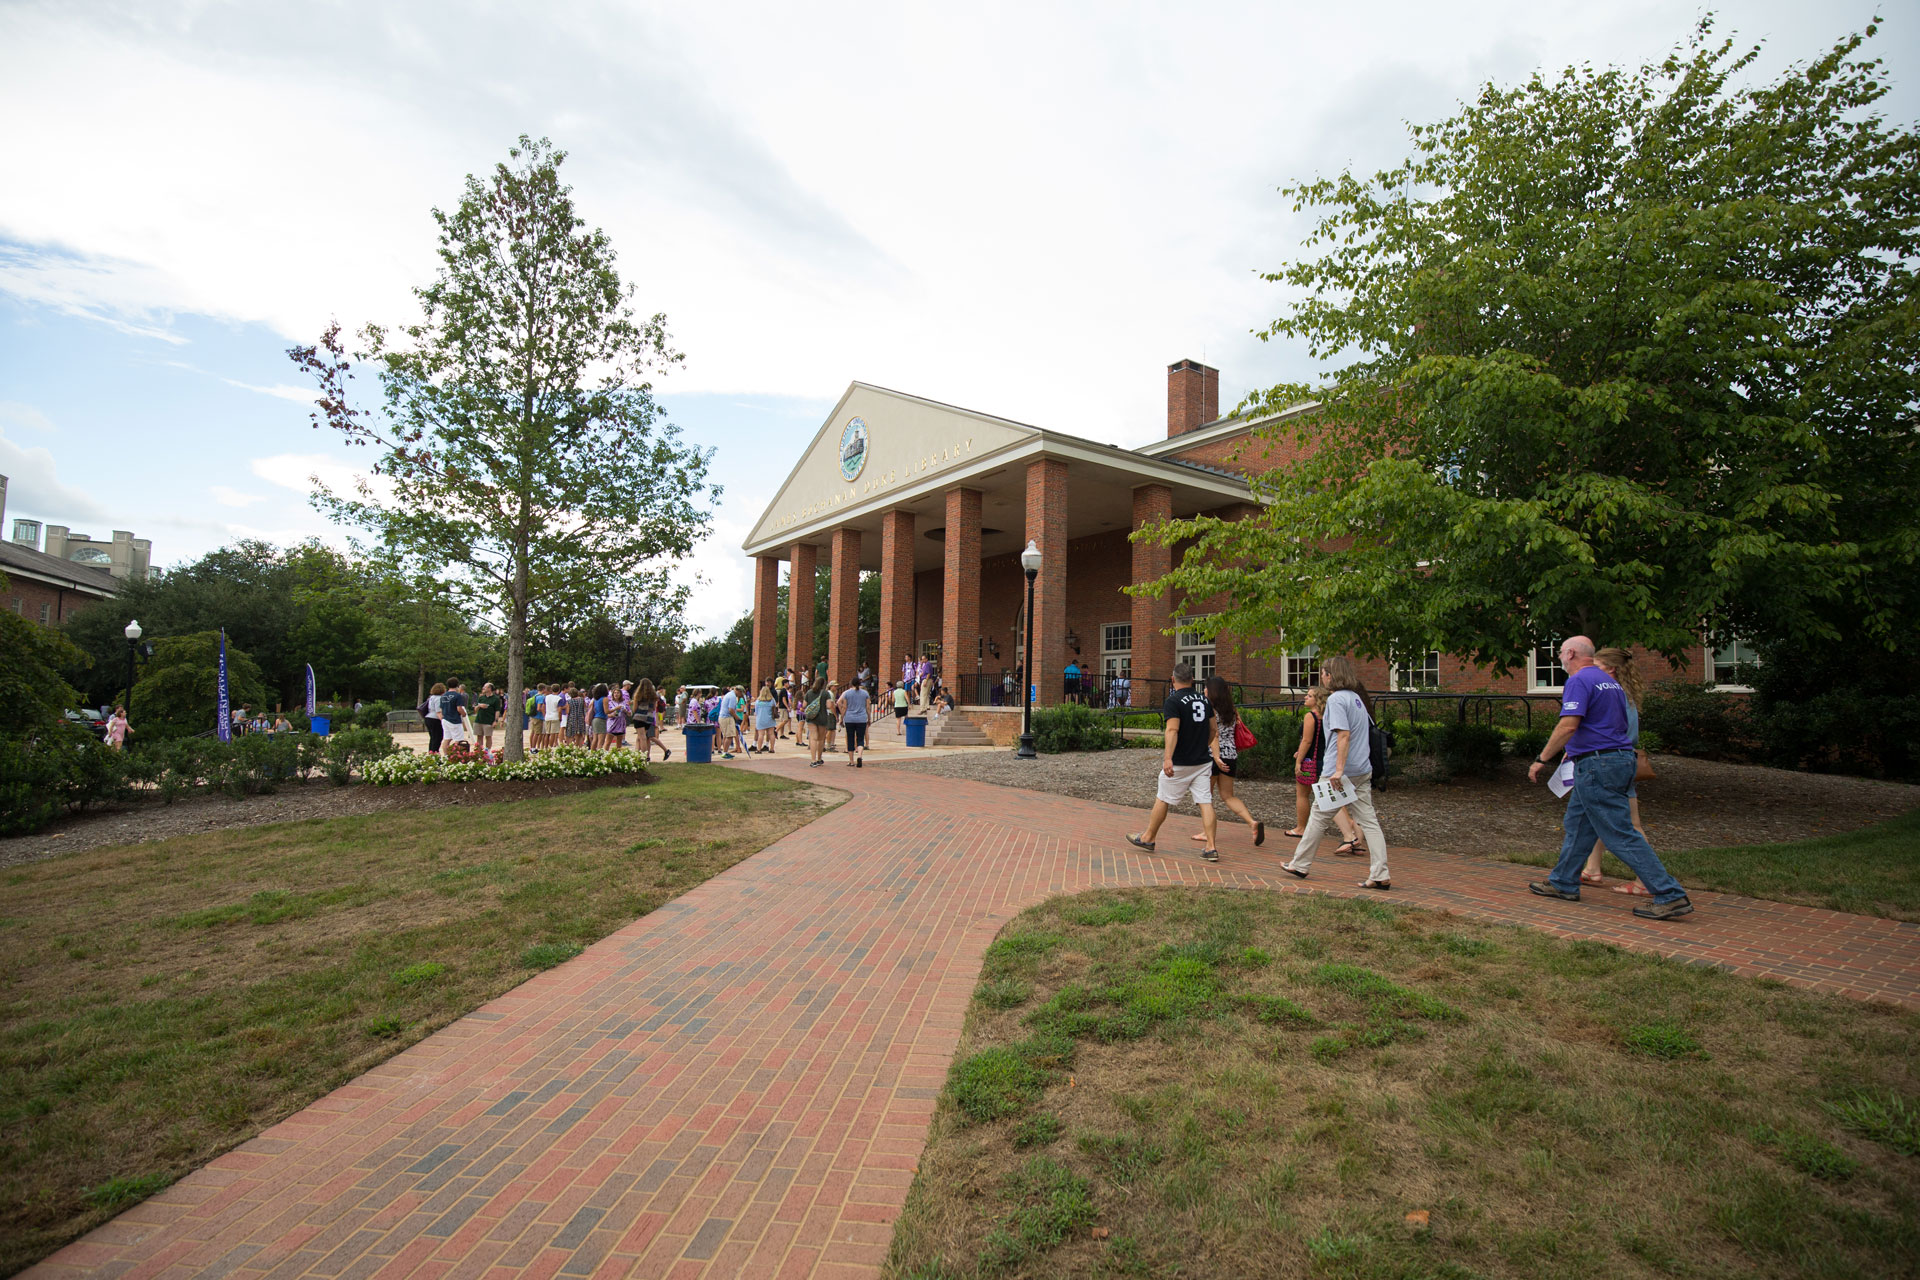 Furman U guarantees internships, research opportunities and mentors for